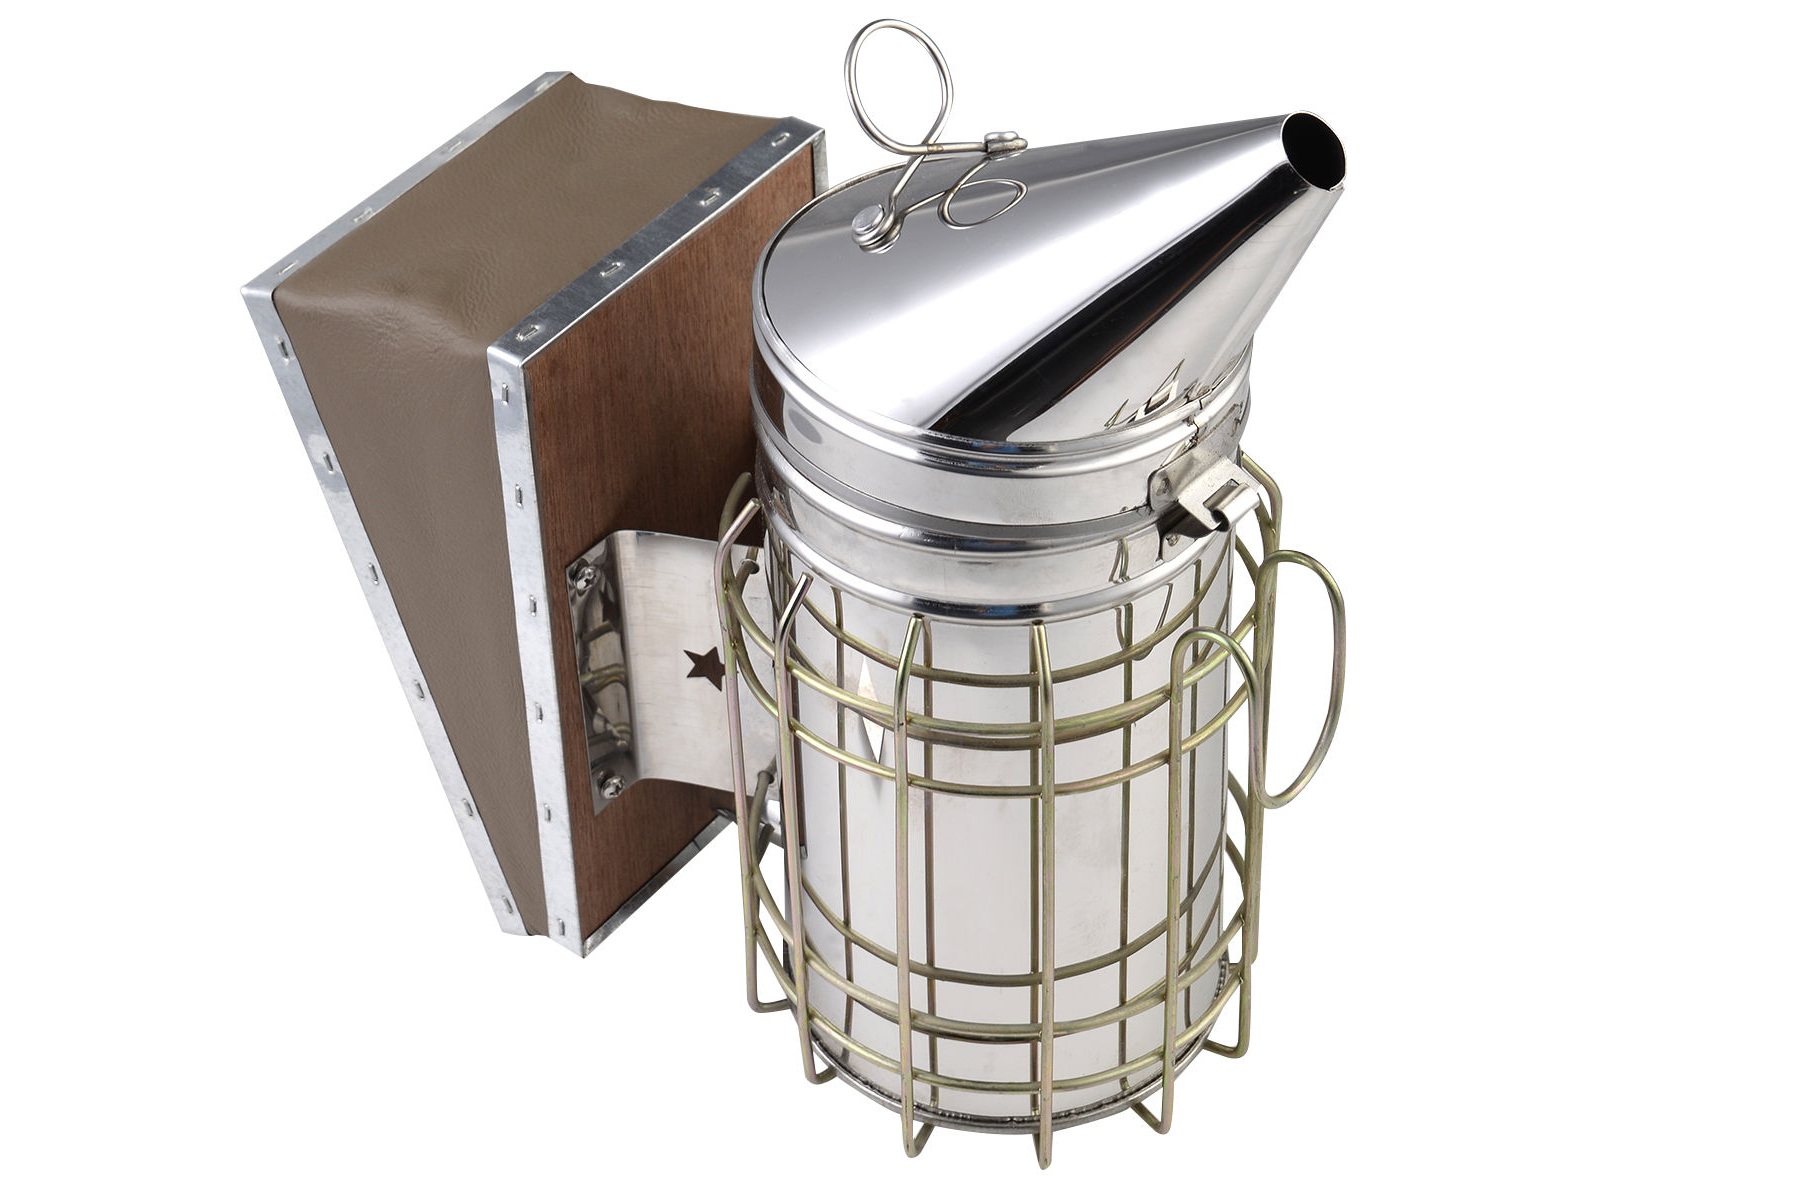 Details about   Bee Hive Smoker Stainless steel with Heat Shield Board Beekeeping Equipment 